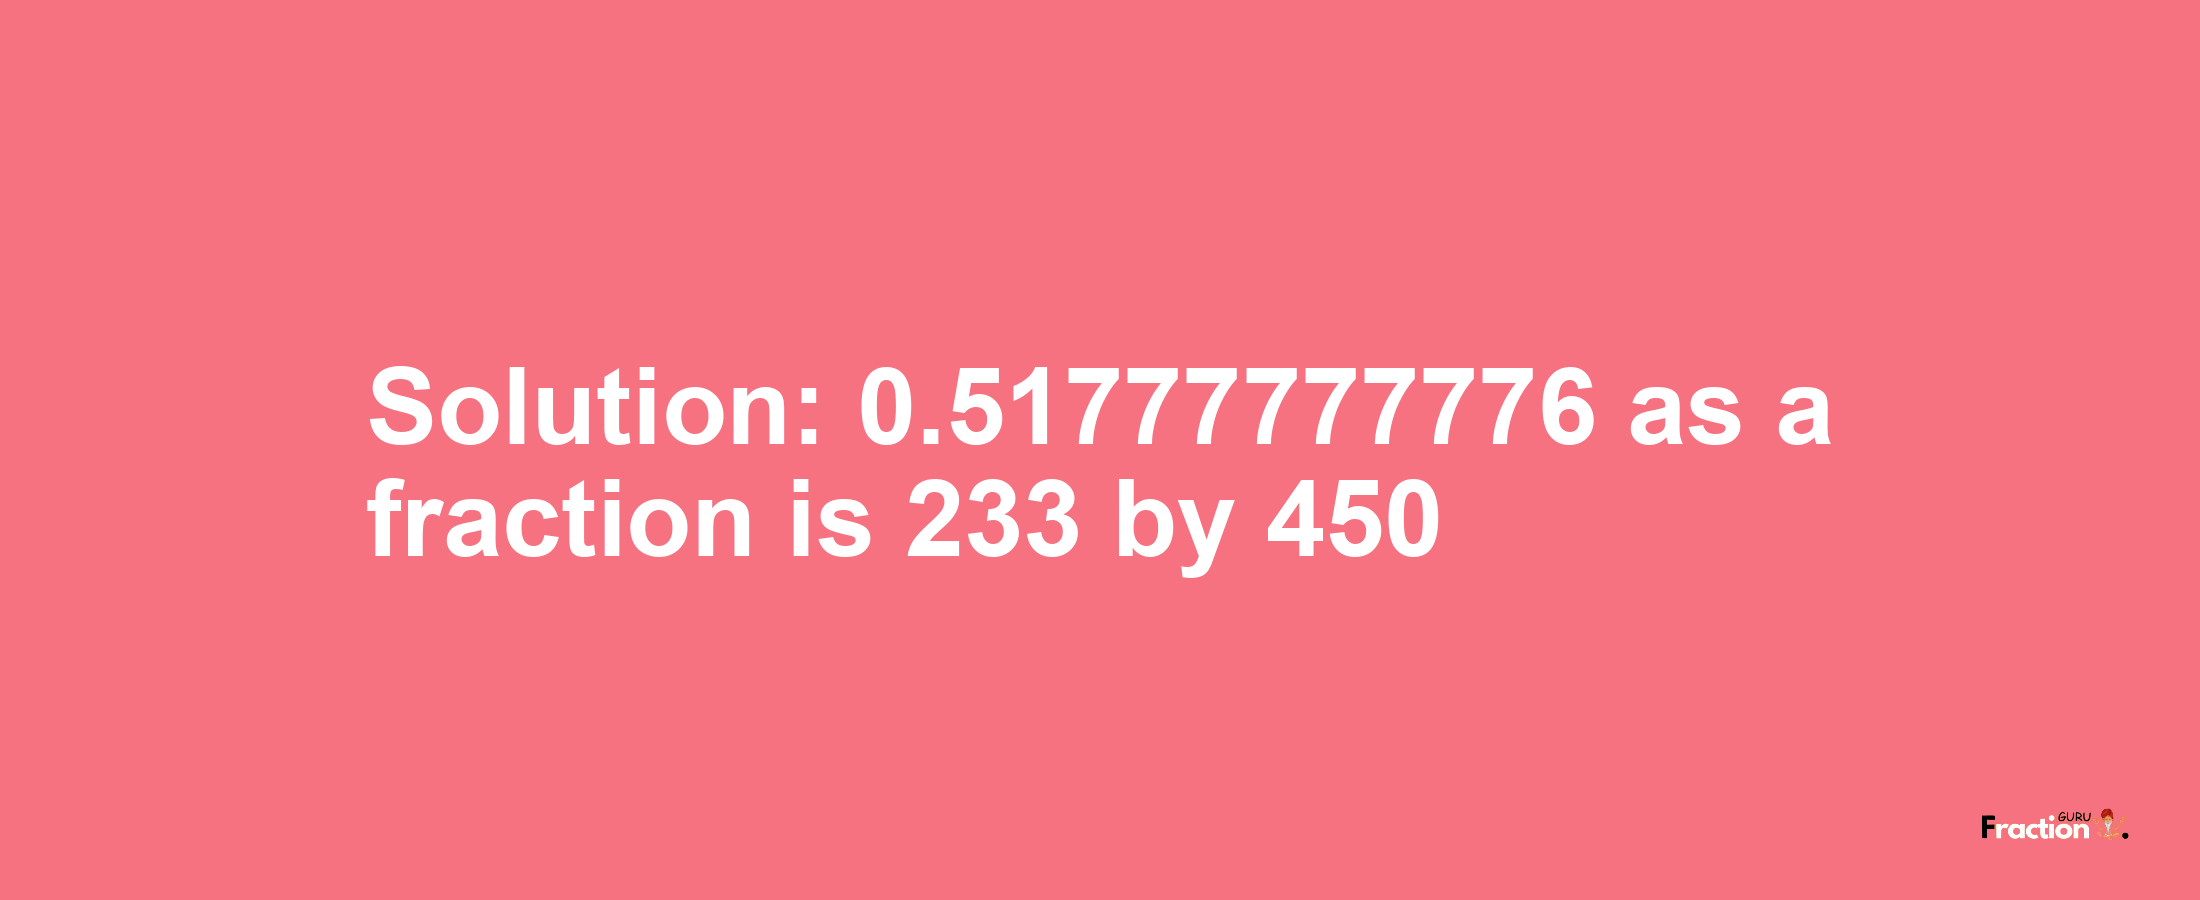 Solution:0.51777777776 as a fraction is 233/450